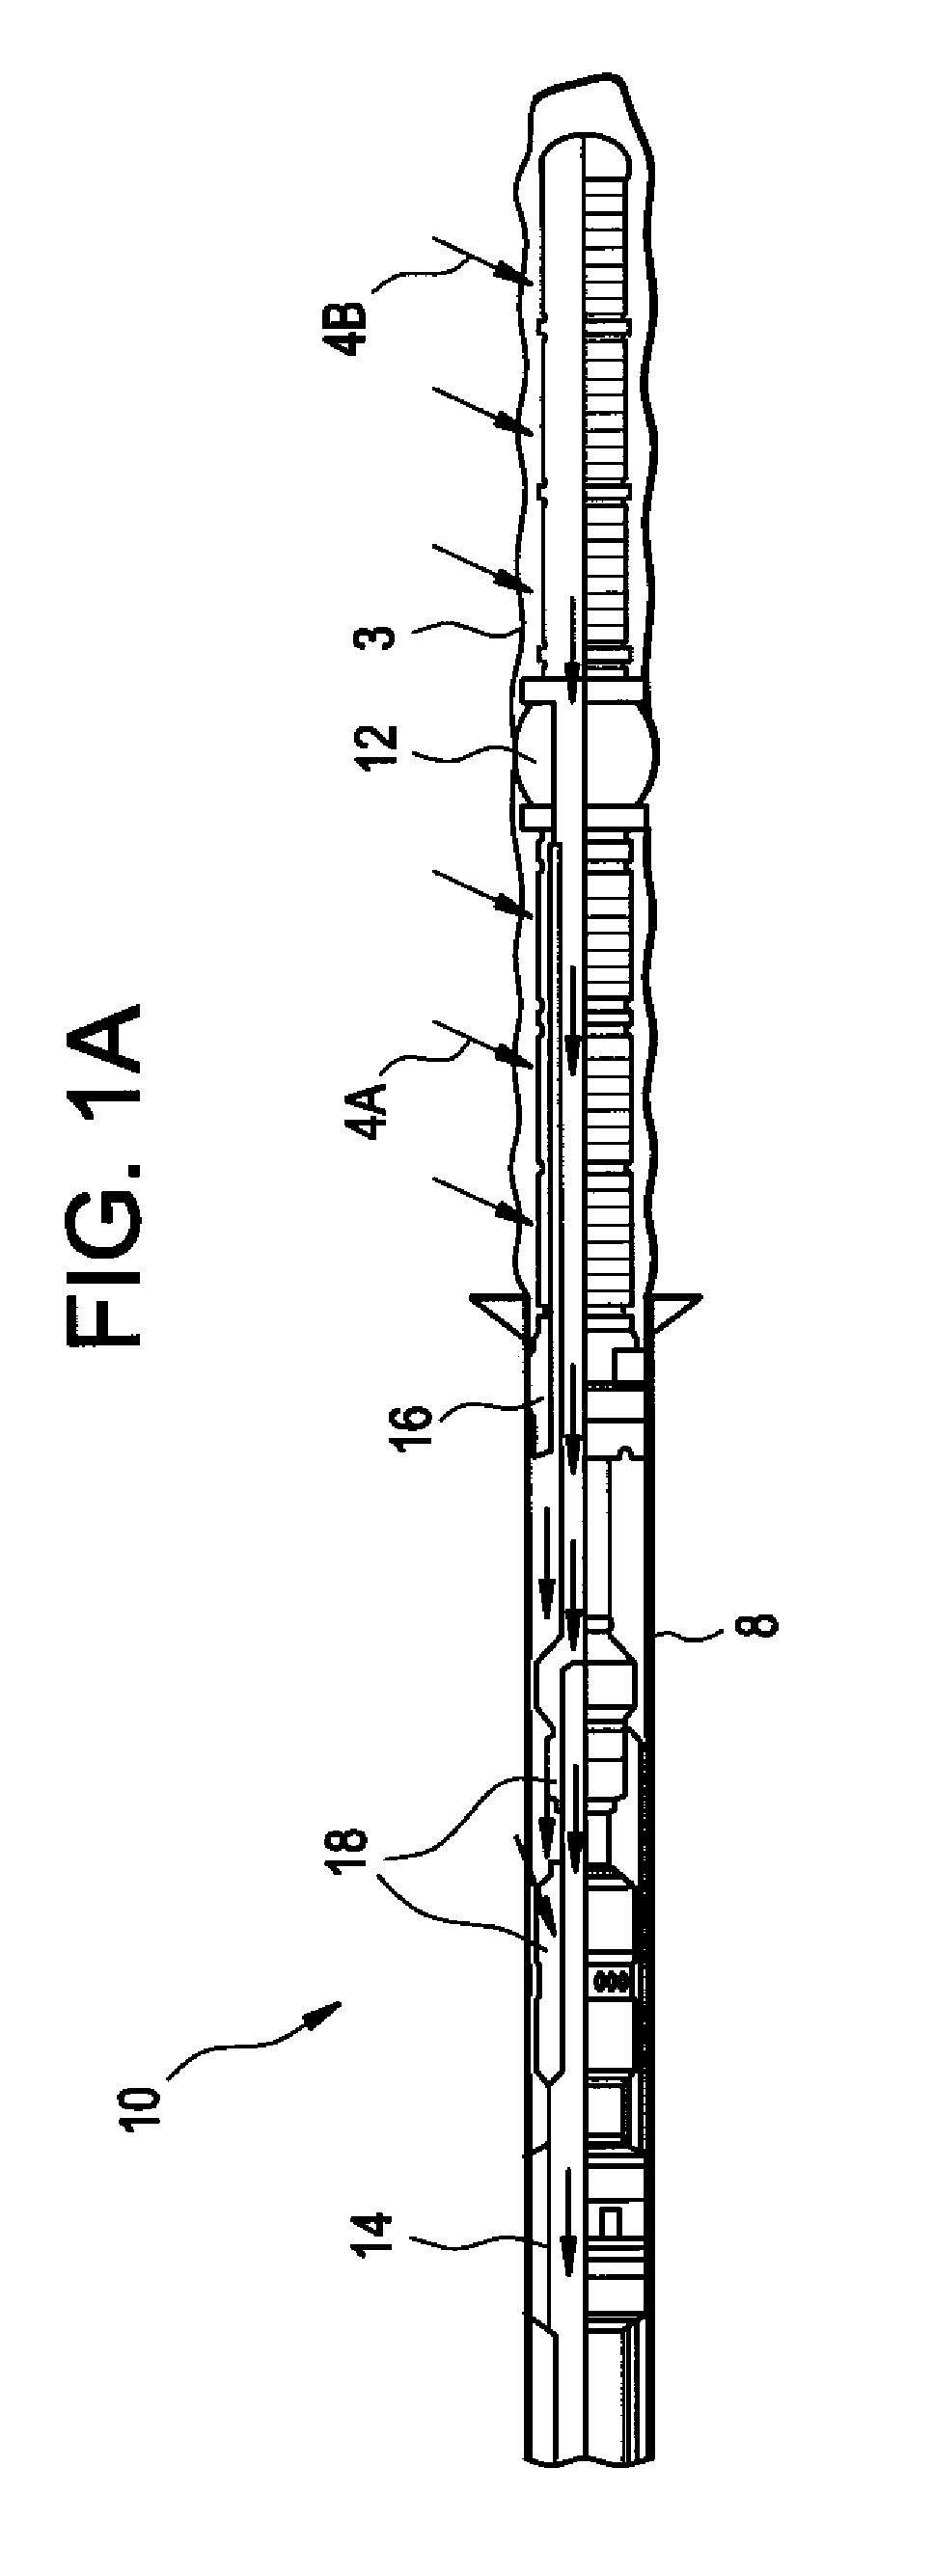 Oilfield Apparatus Comprising Swellable Elastomers Having Nanosensors Therein And Methods Of Using Same In Oilfield Application